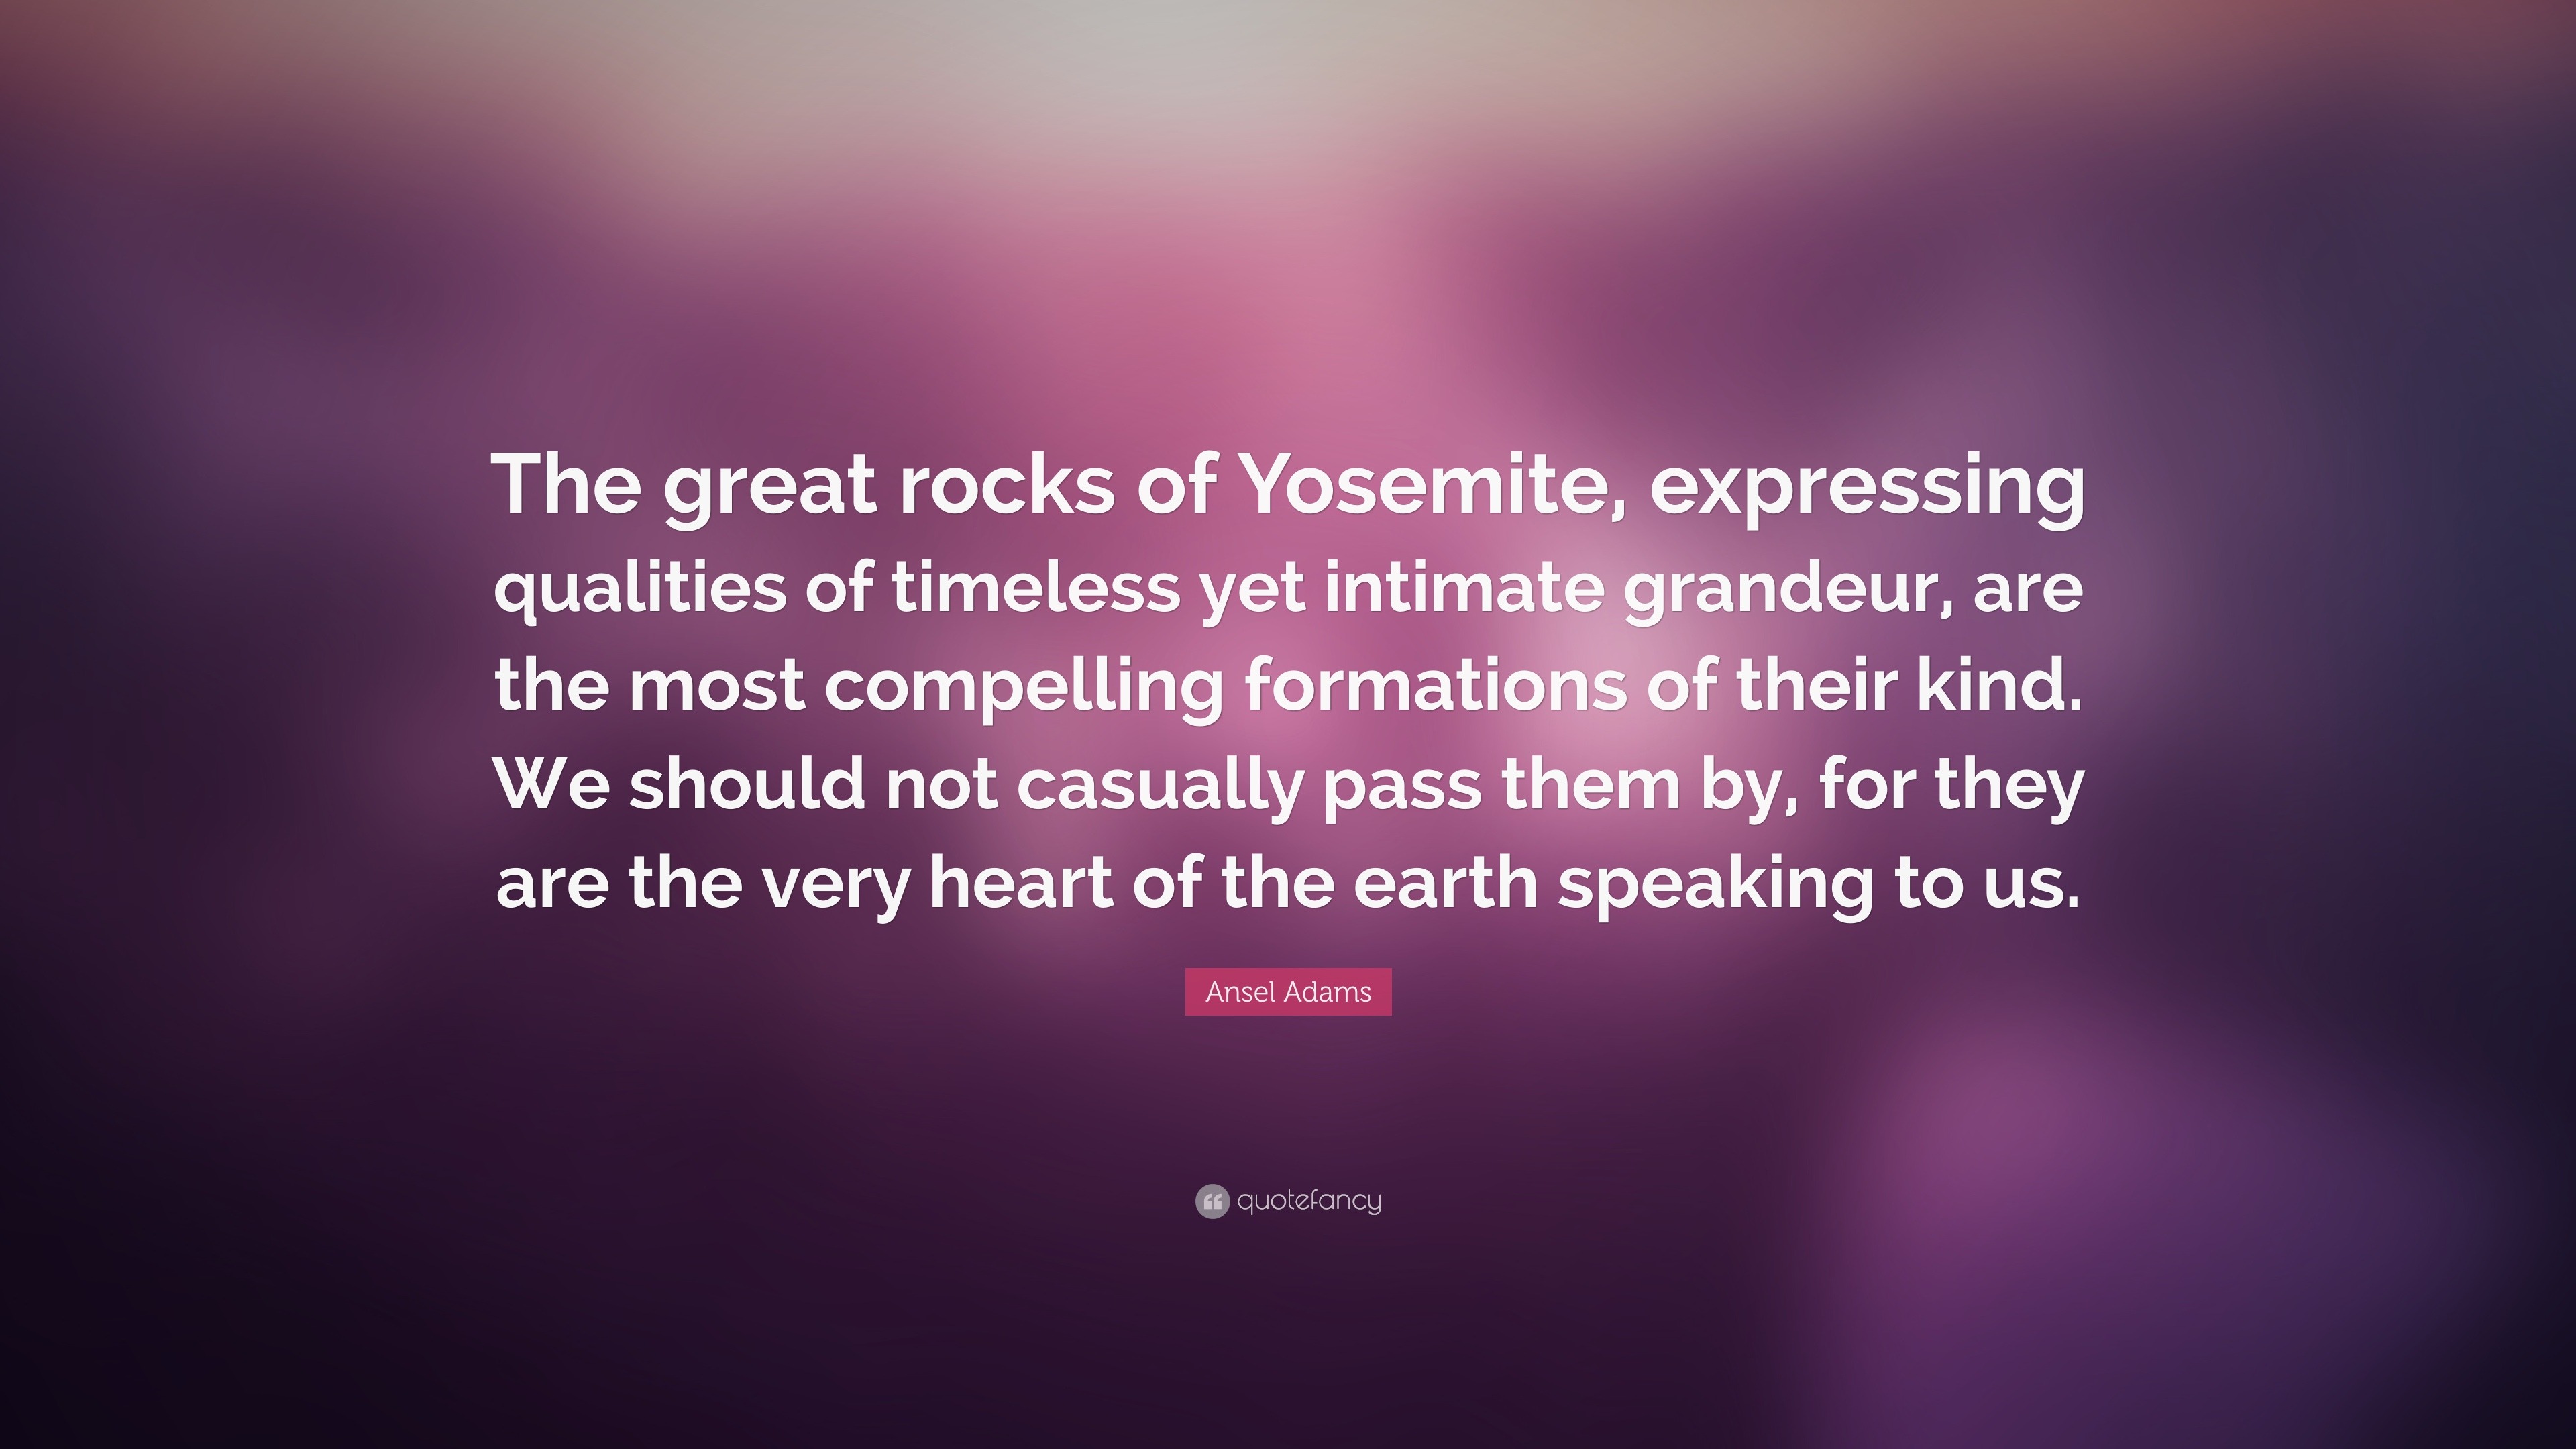 Ansel Adams Quote: “The great rocks of Yosemite, expressing qualities